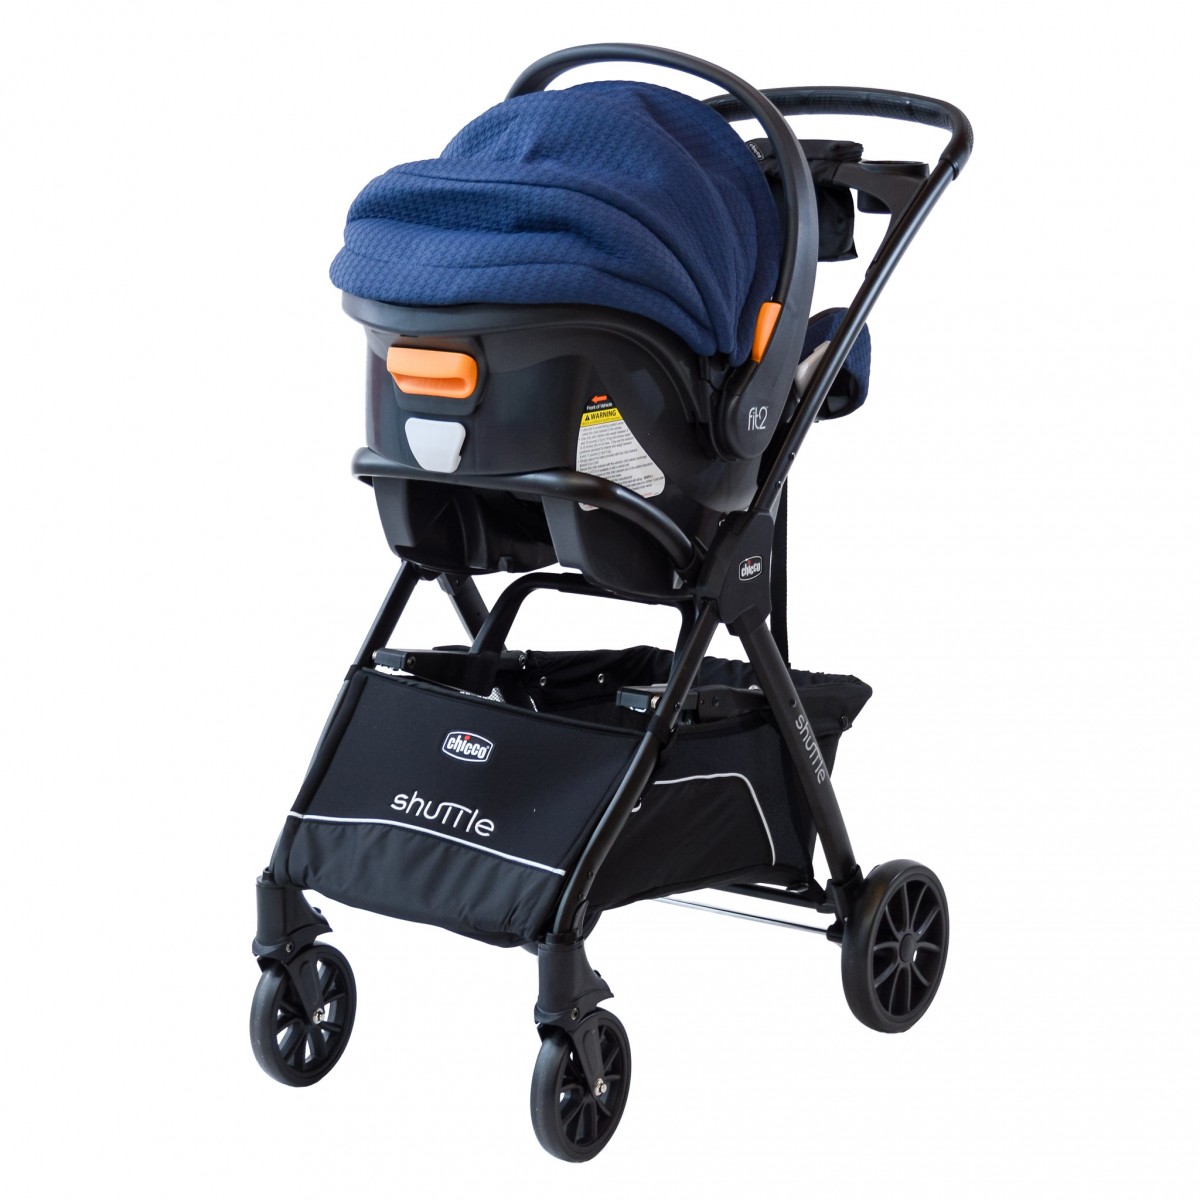 Chicco Shuttle Review